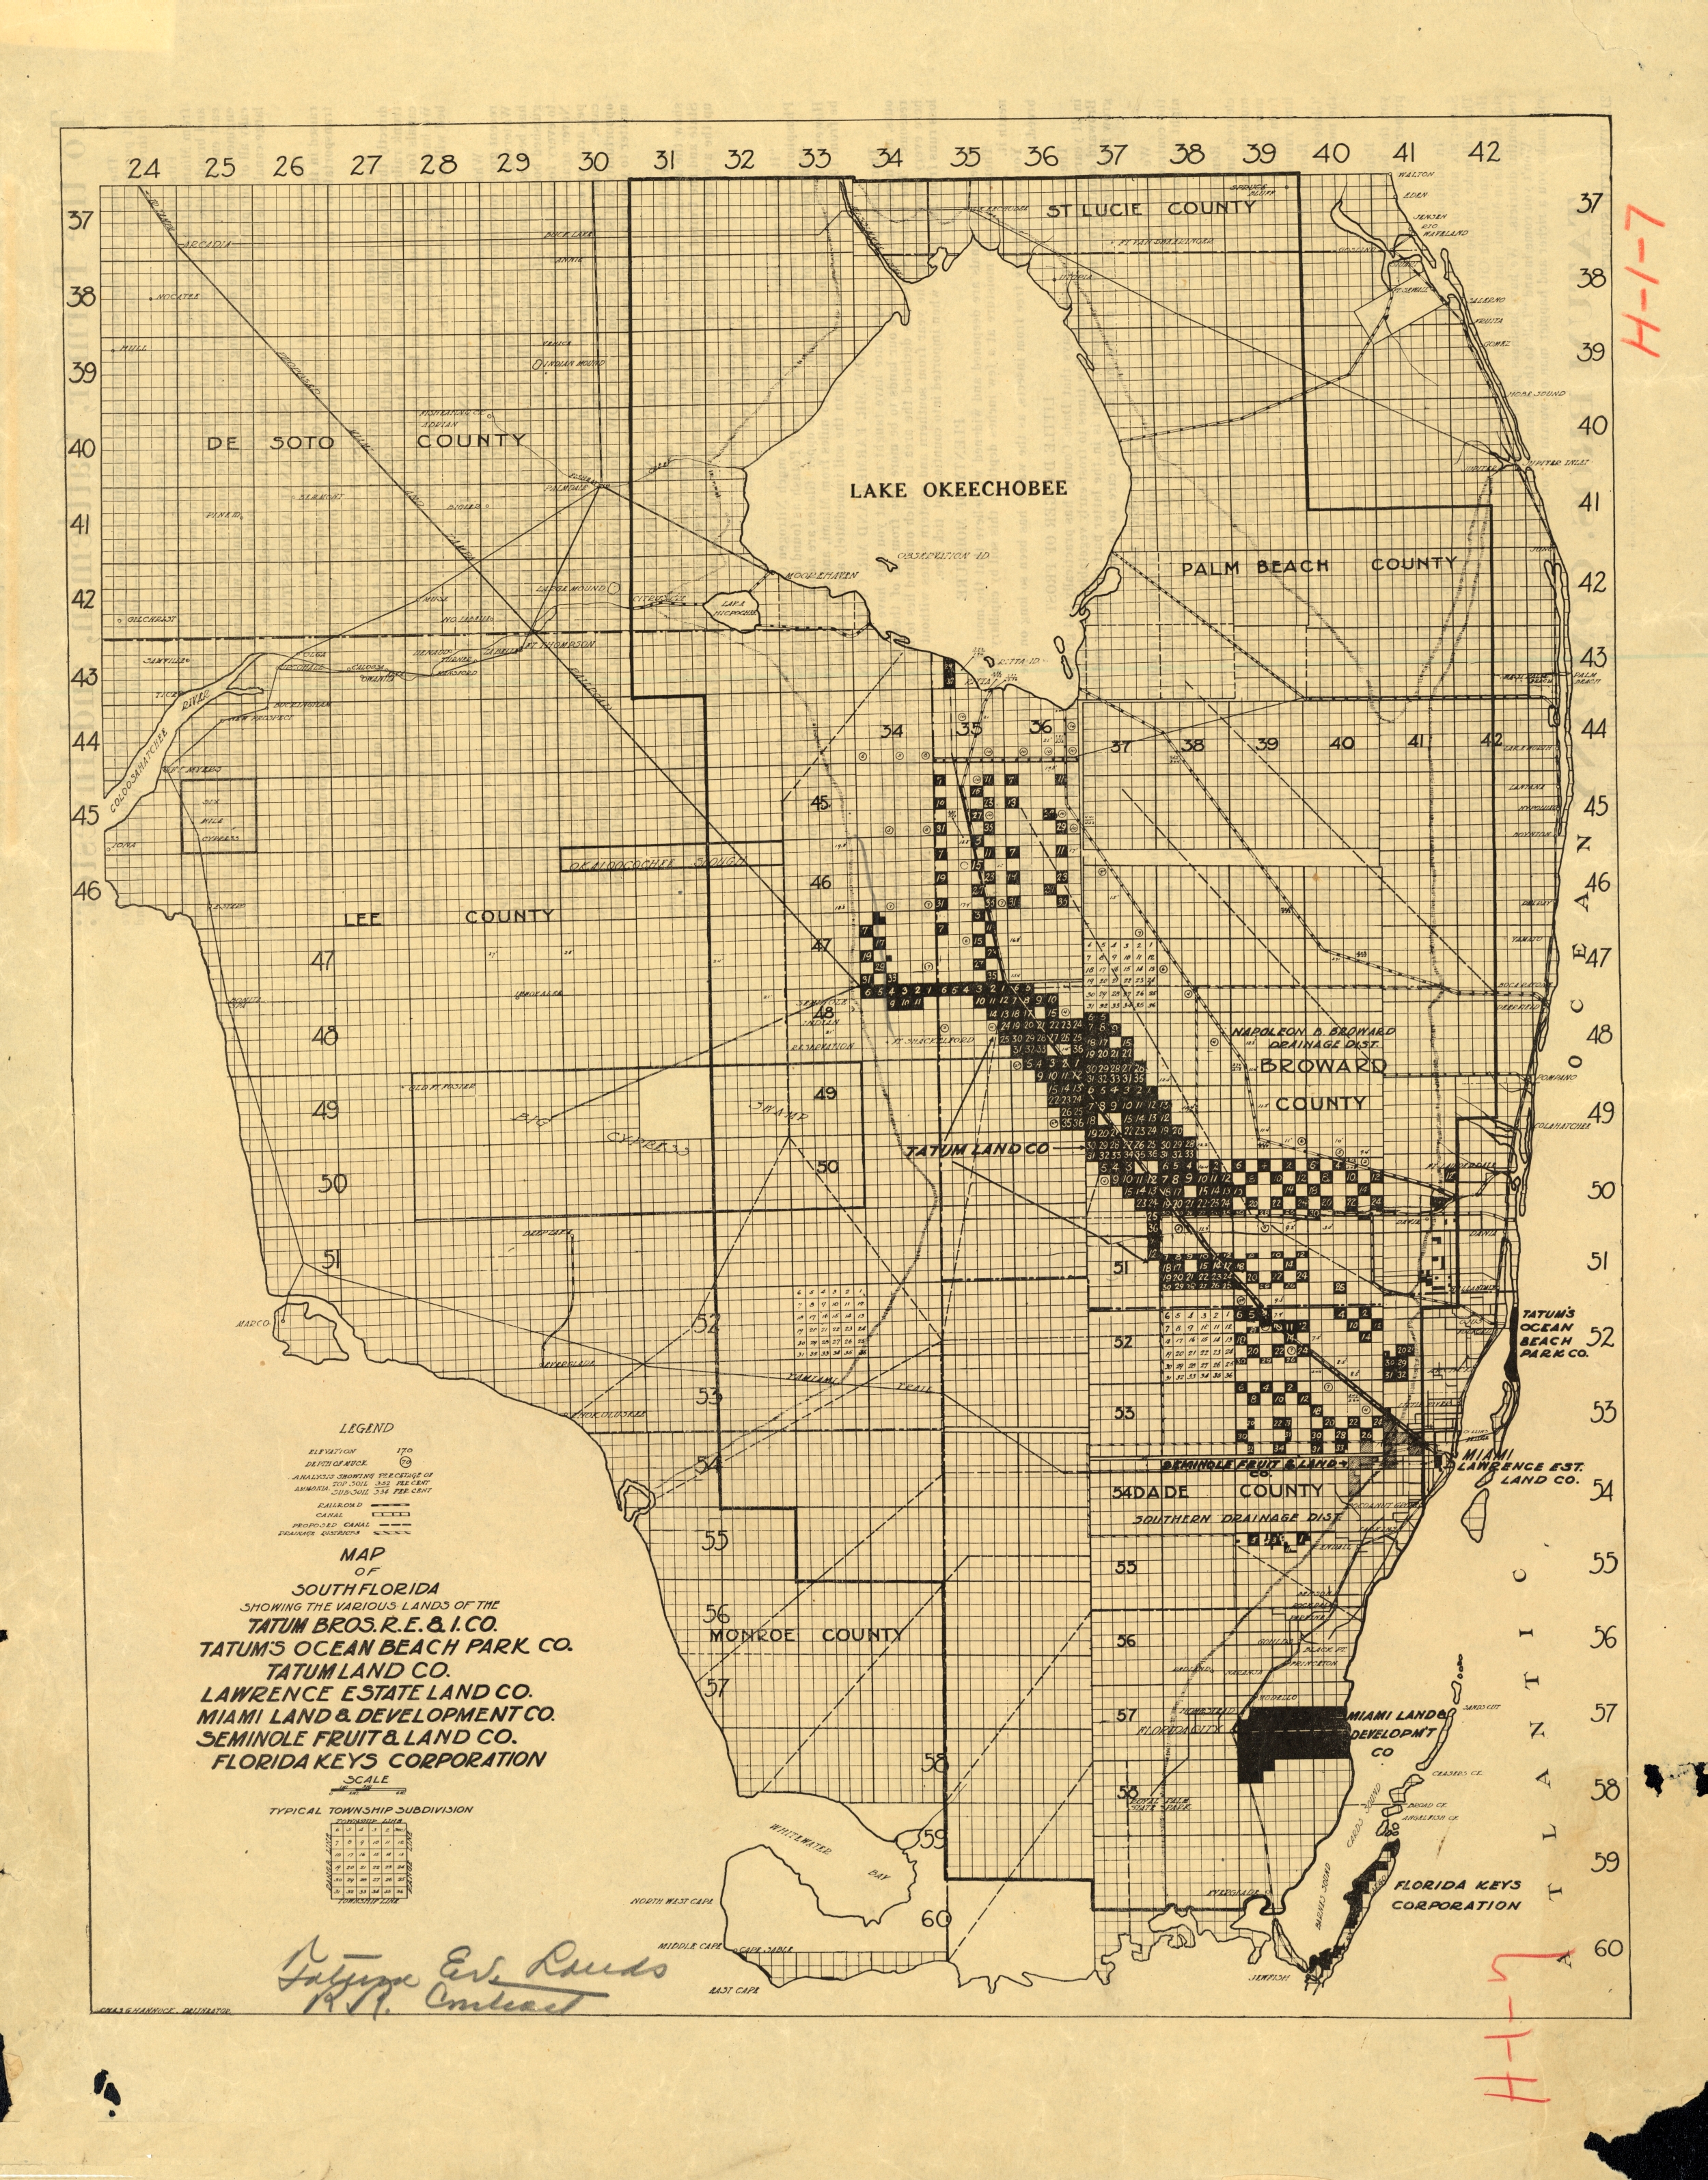 Land Sale Map of South Florida, 1917